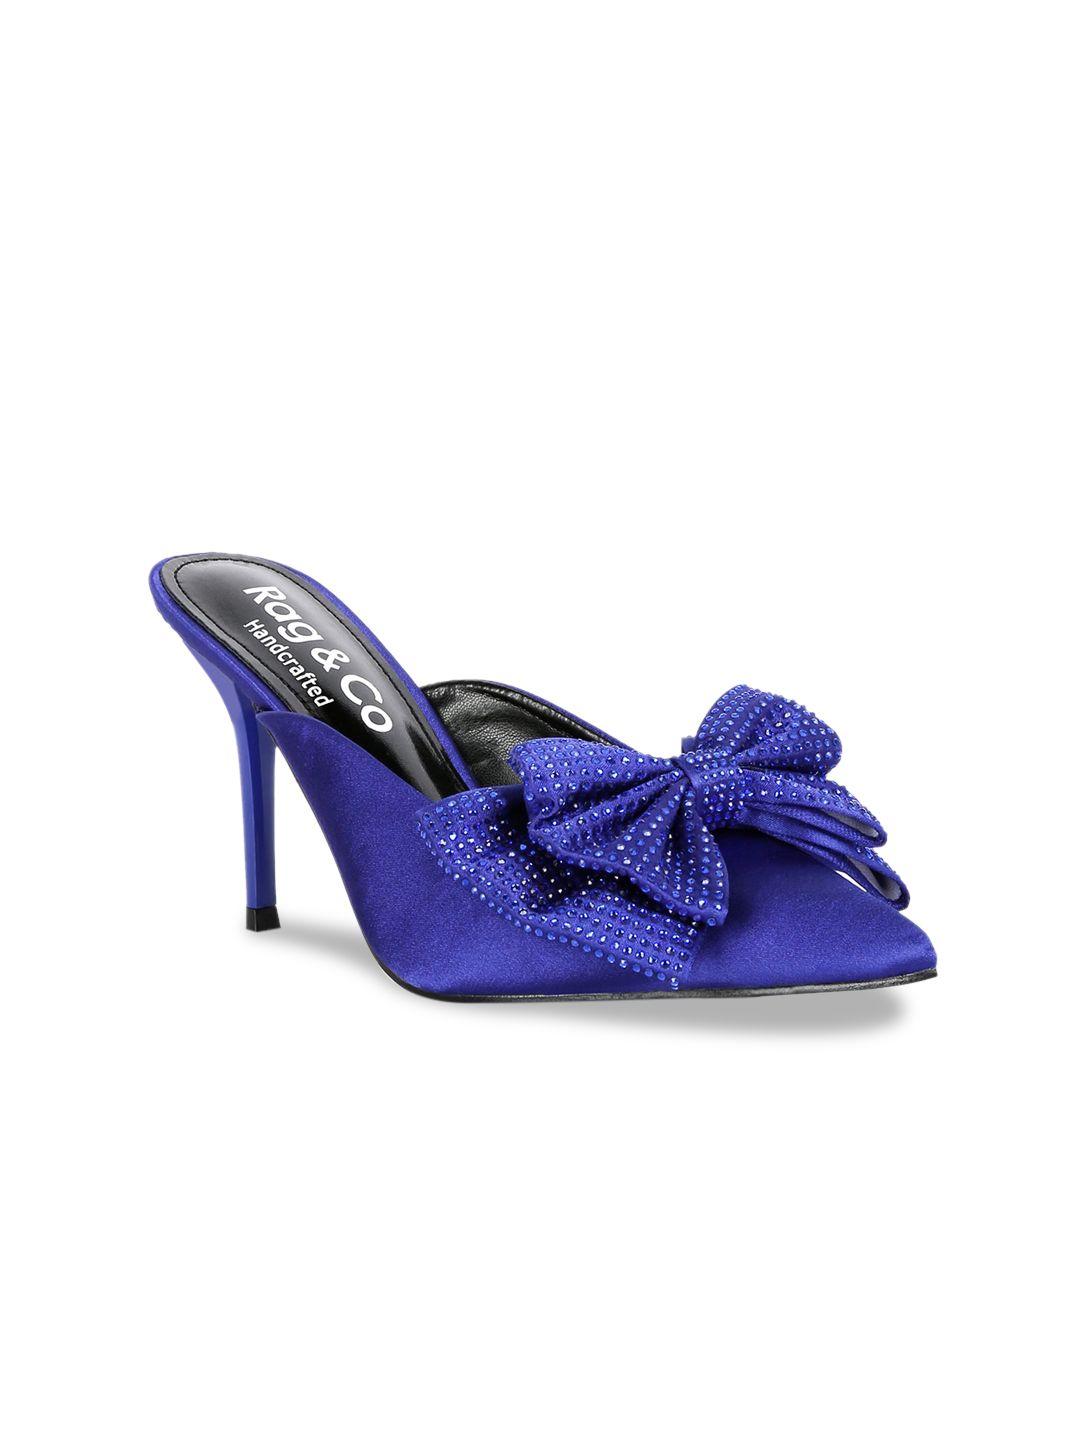 rag-&-co-women-navy-blue-embellished-party-mules-with-bows